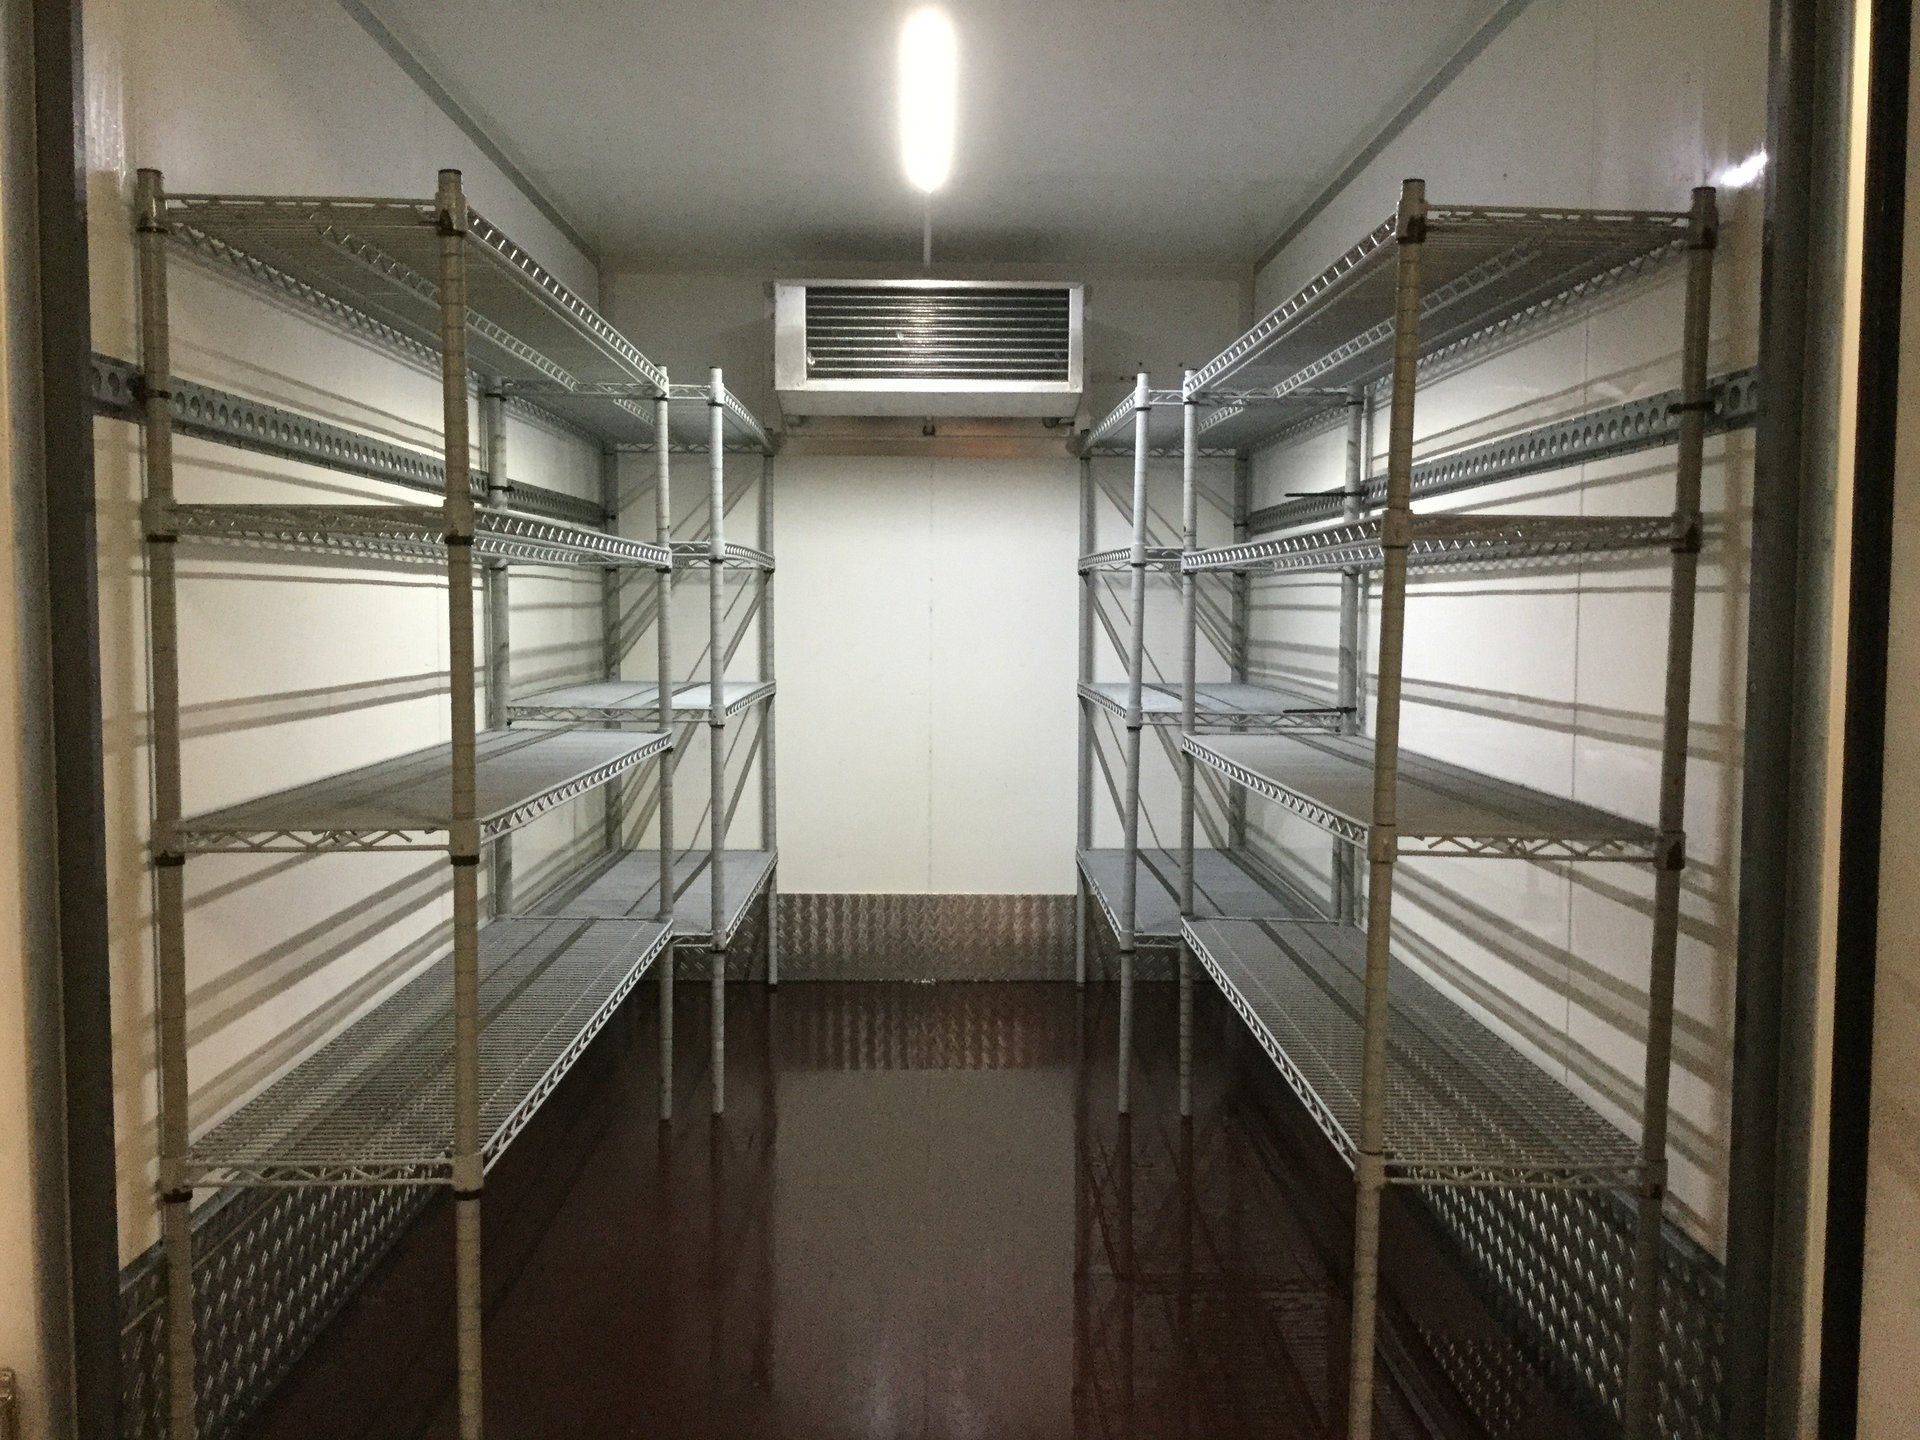 Internal Shelving comes as standard on all trailers